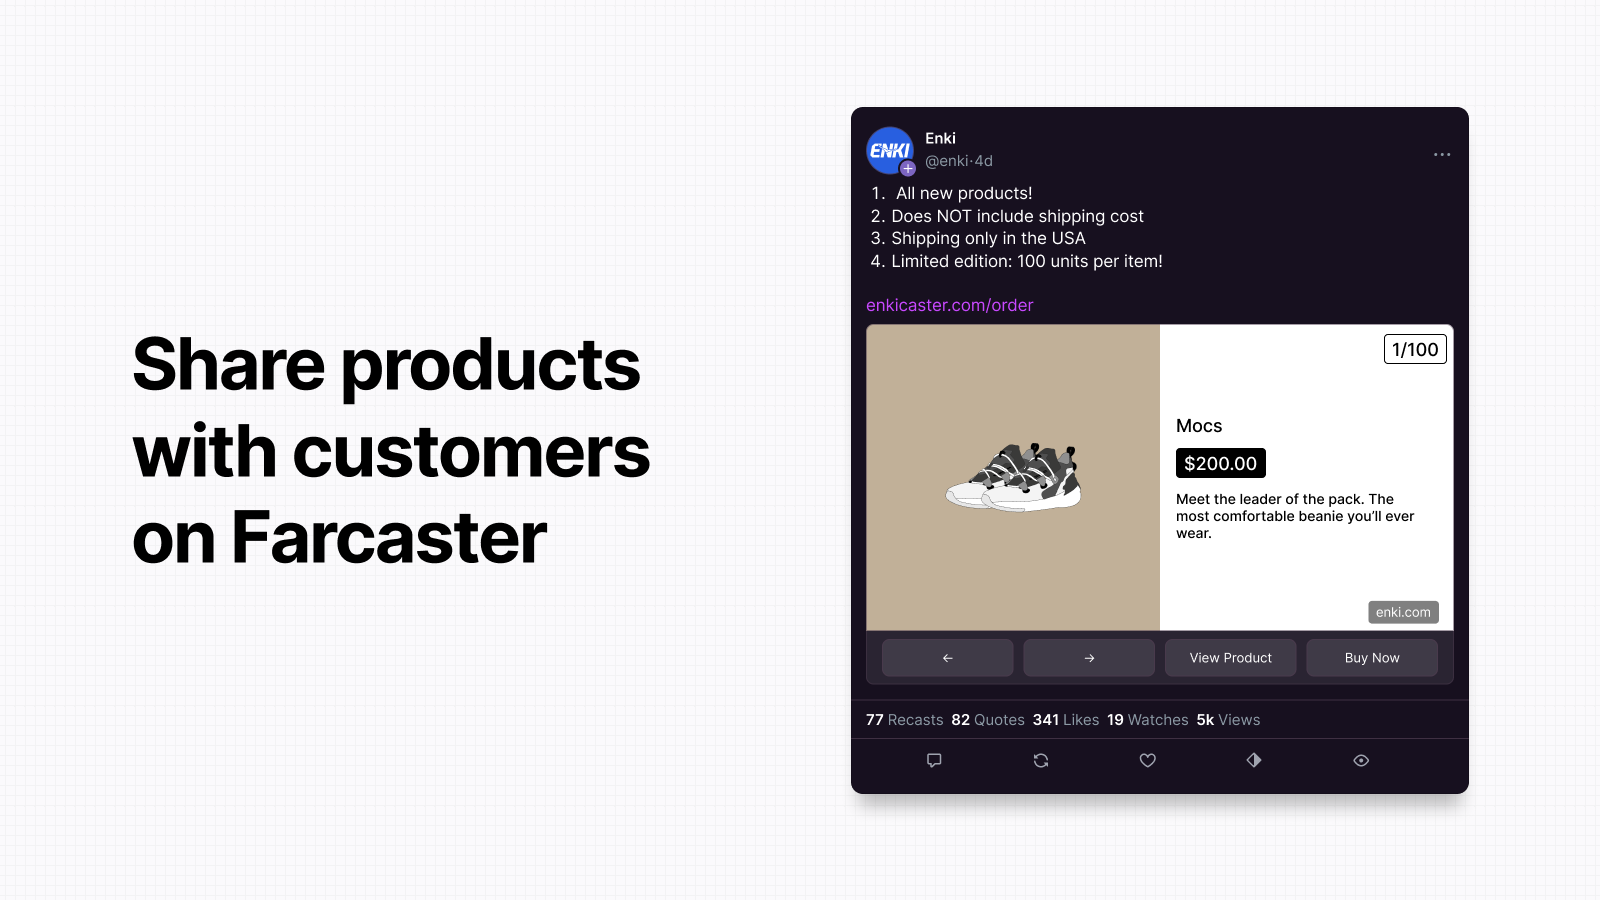 Share products on Farcaster